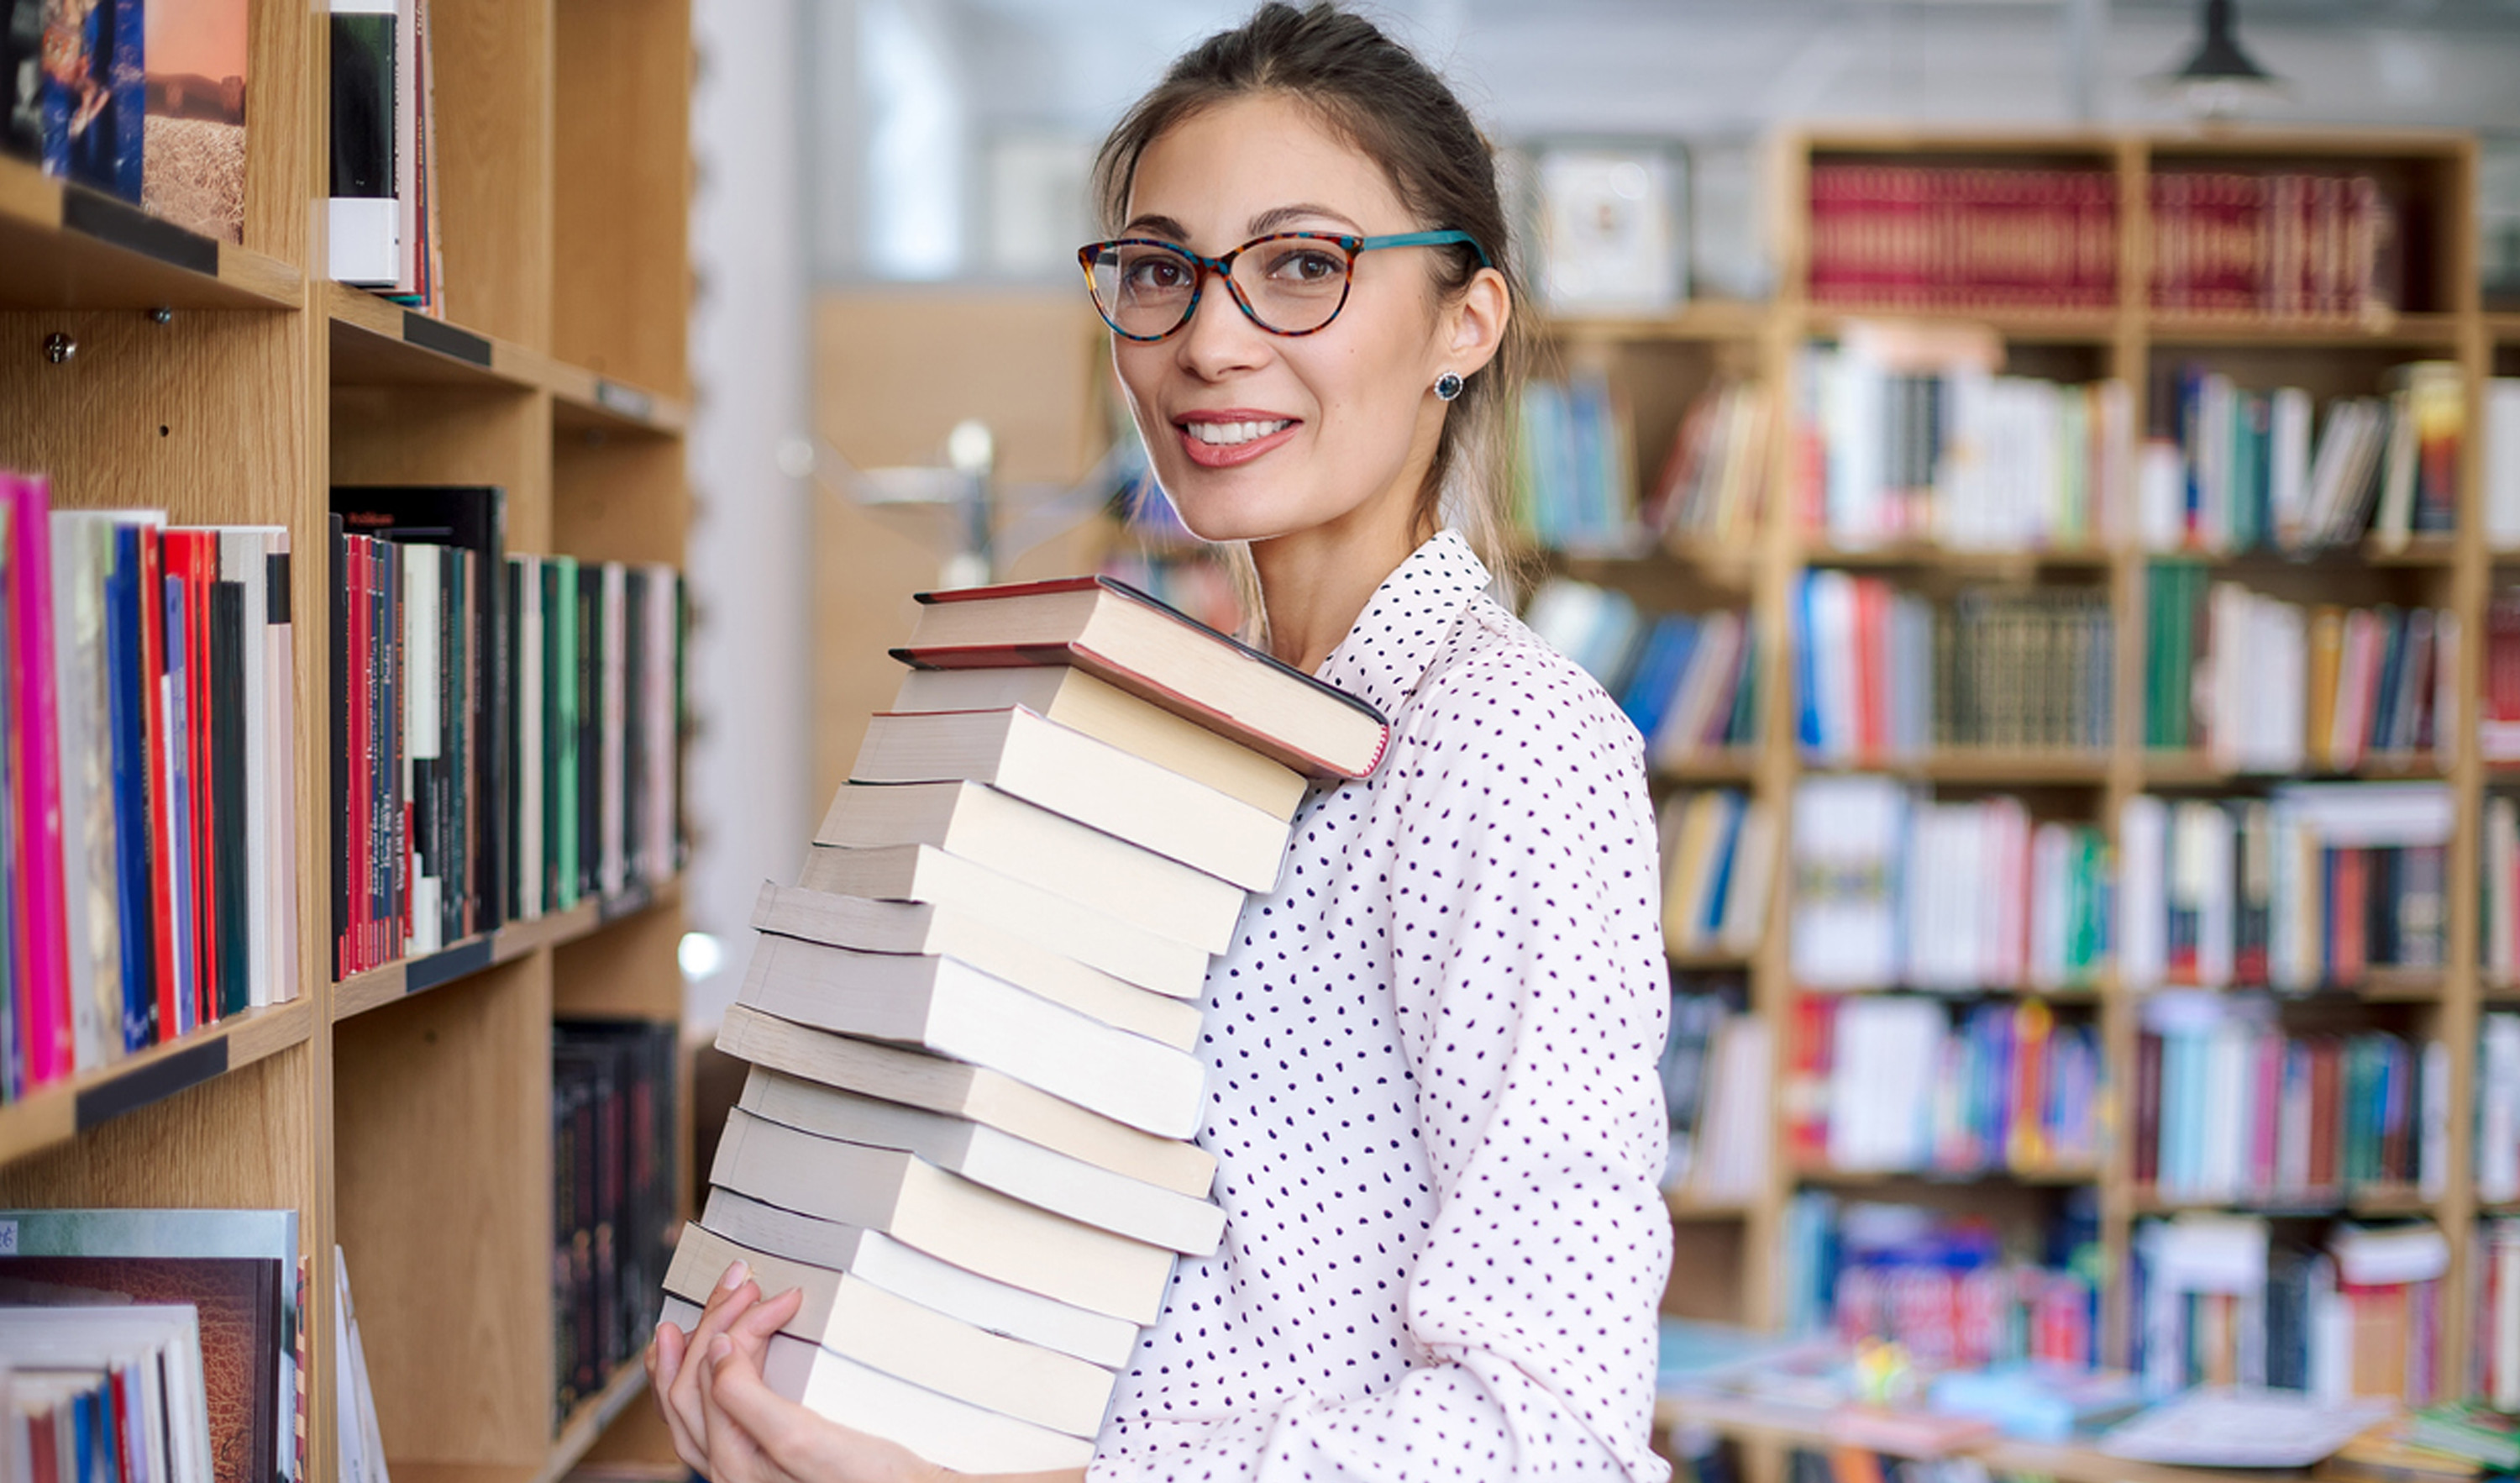 Woman holding a stack of books in a library